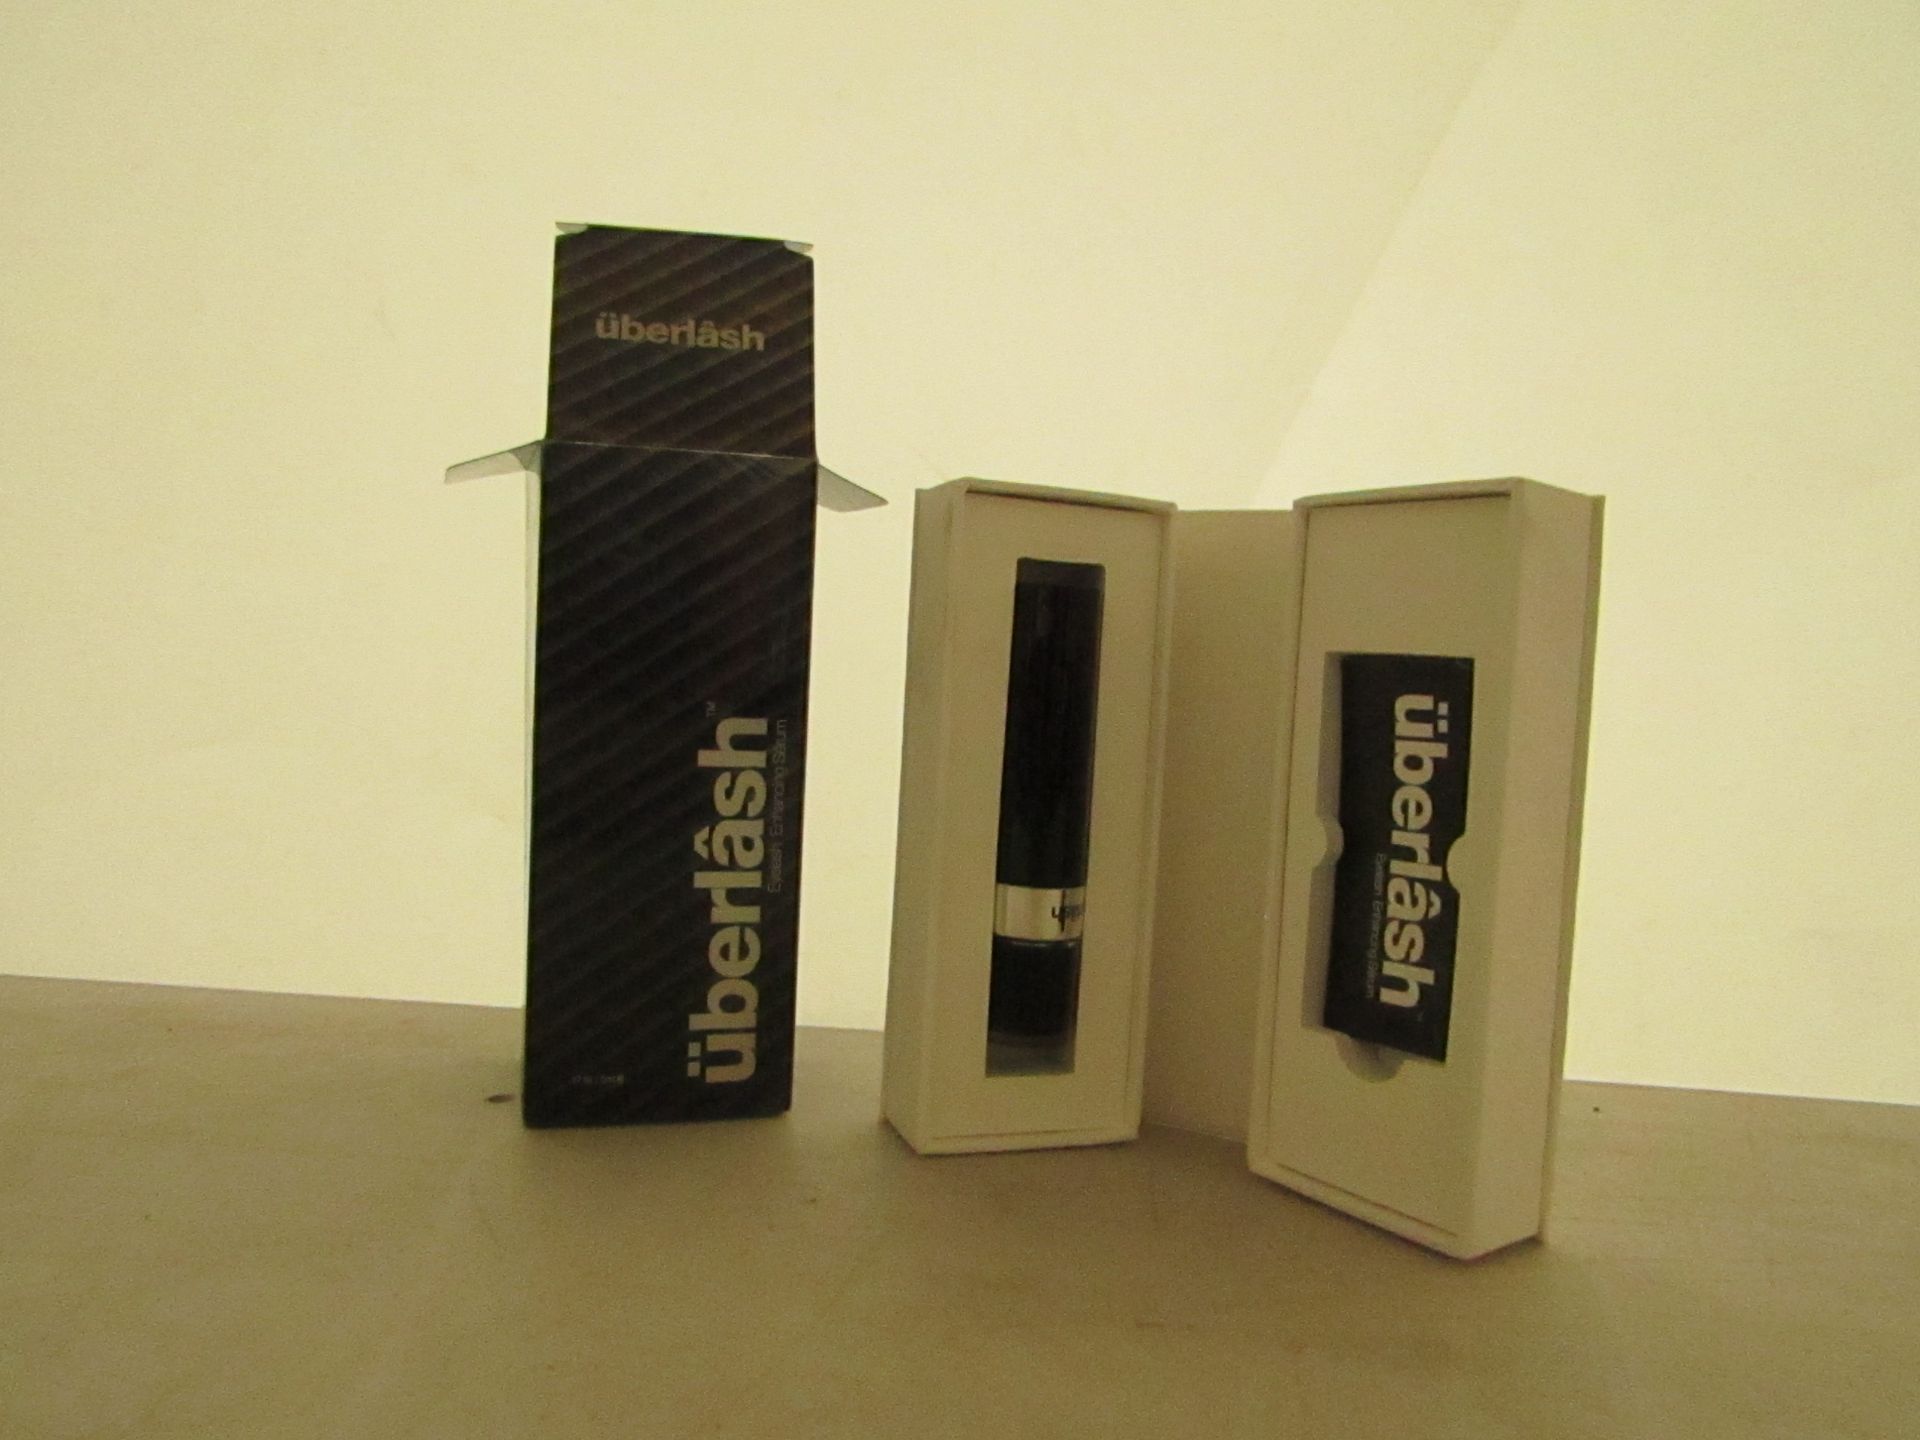 Uberlash enhancing serum 5ml, thickens appearance, intensifies, boosts and moisturises lashes. New